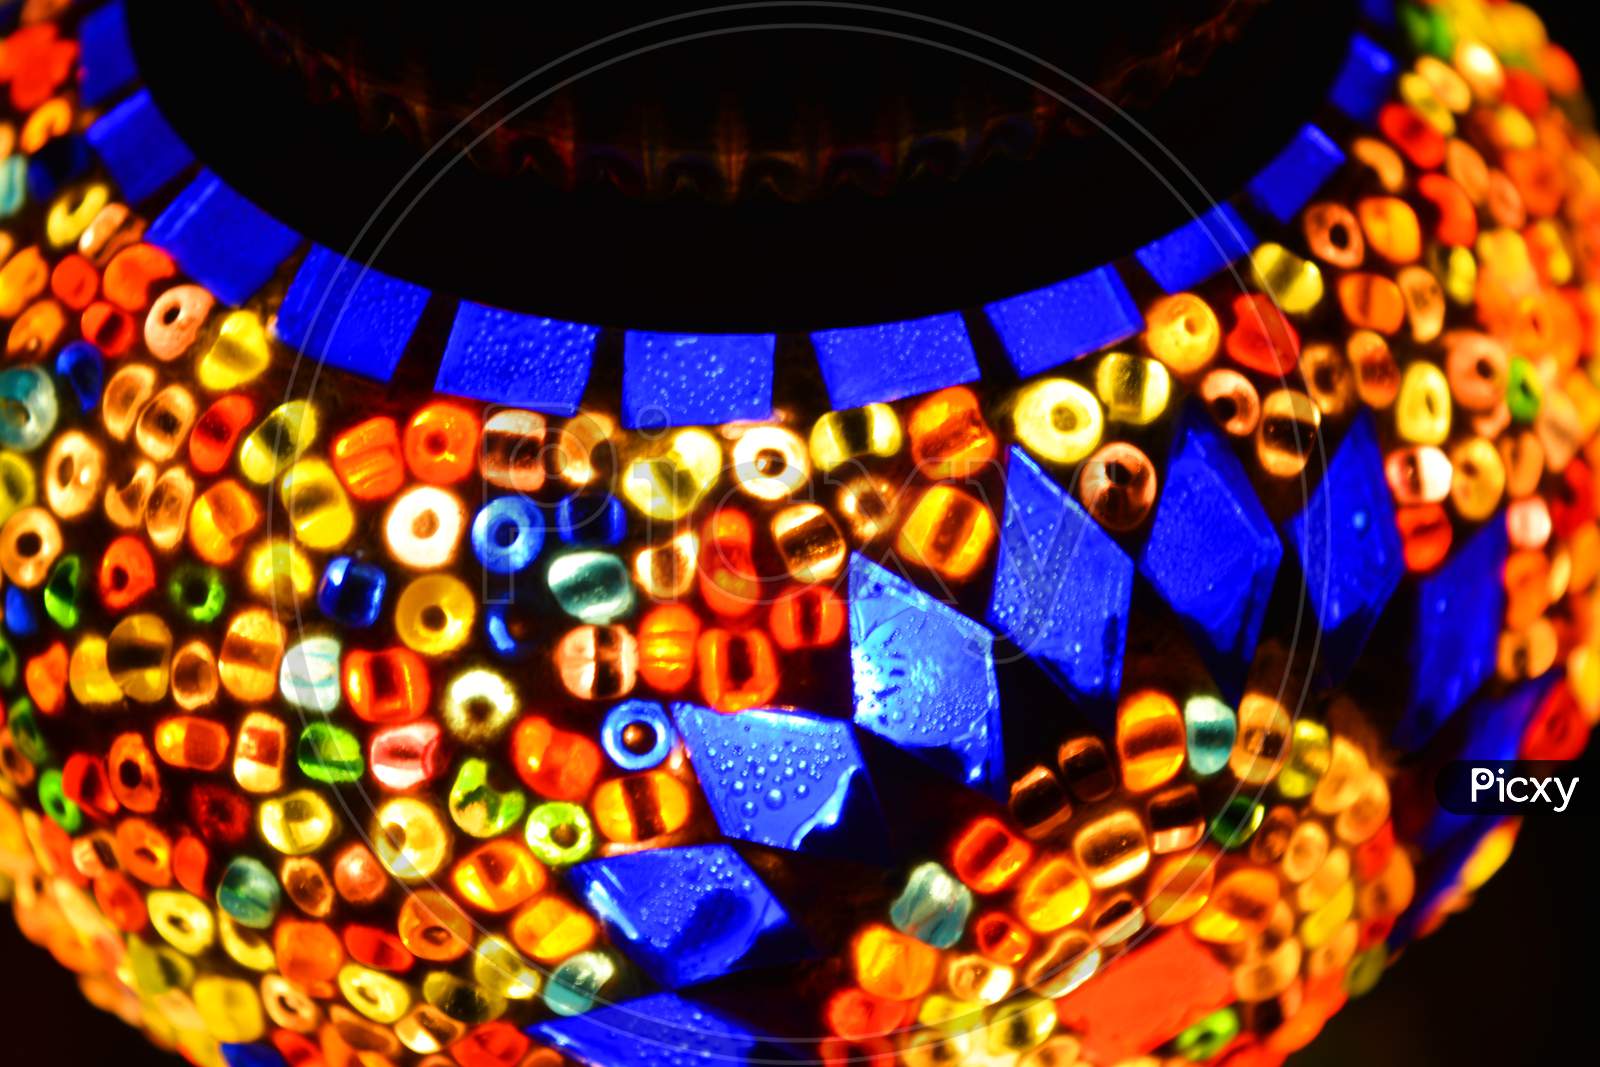 An unusual shade made of multicolored mosaics, colored beads and bright glass is located in the Turkish national lamp.